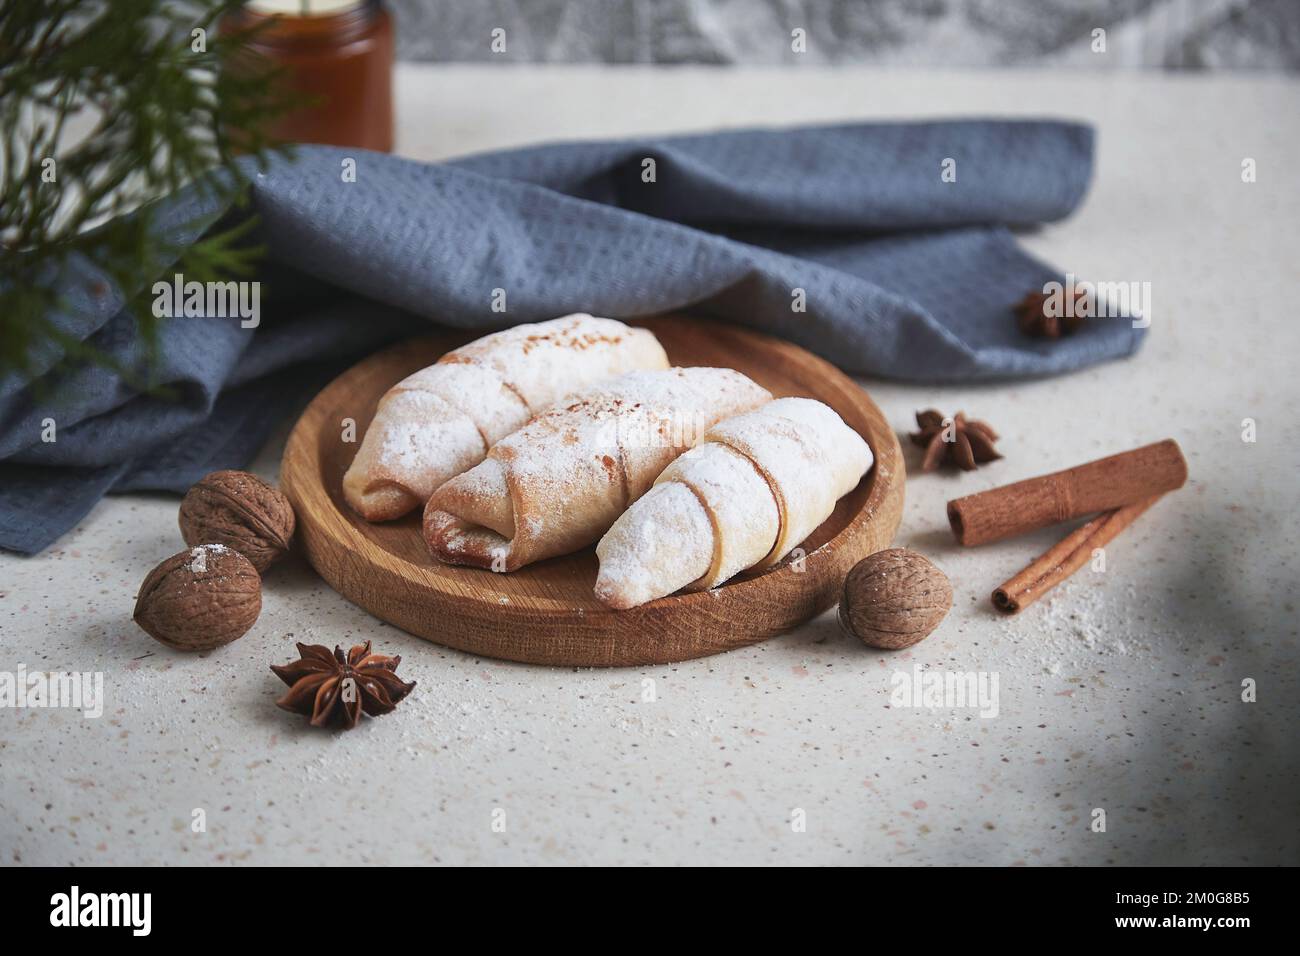 Classical atmospheric Christmas crescent bagels with cinnamon sticks, star anise and walnuts. Stock Photo